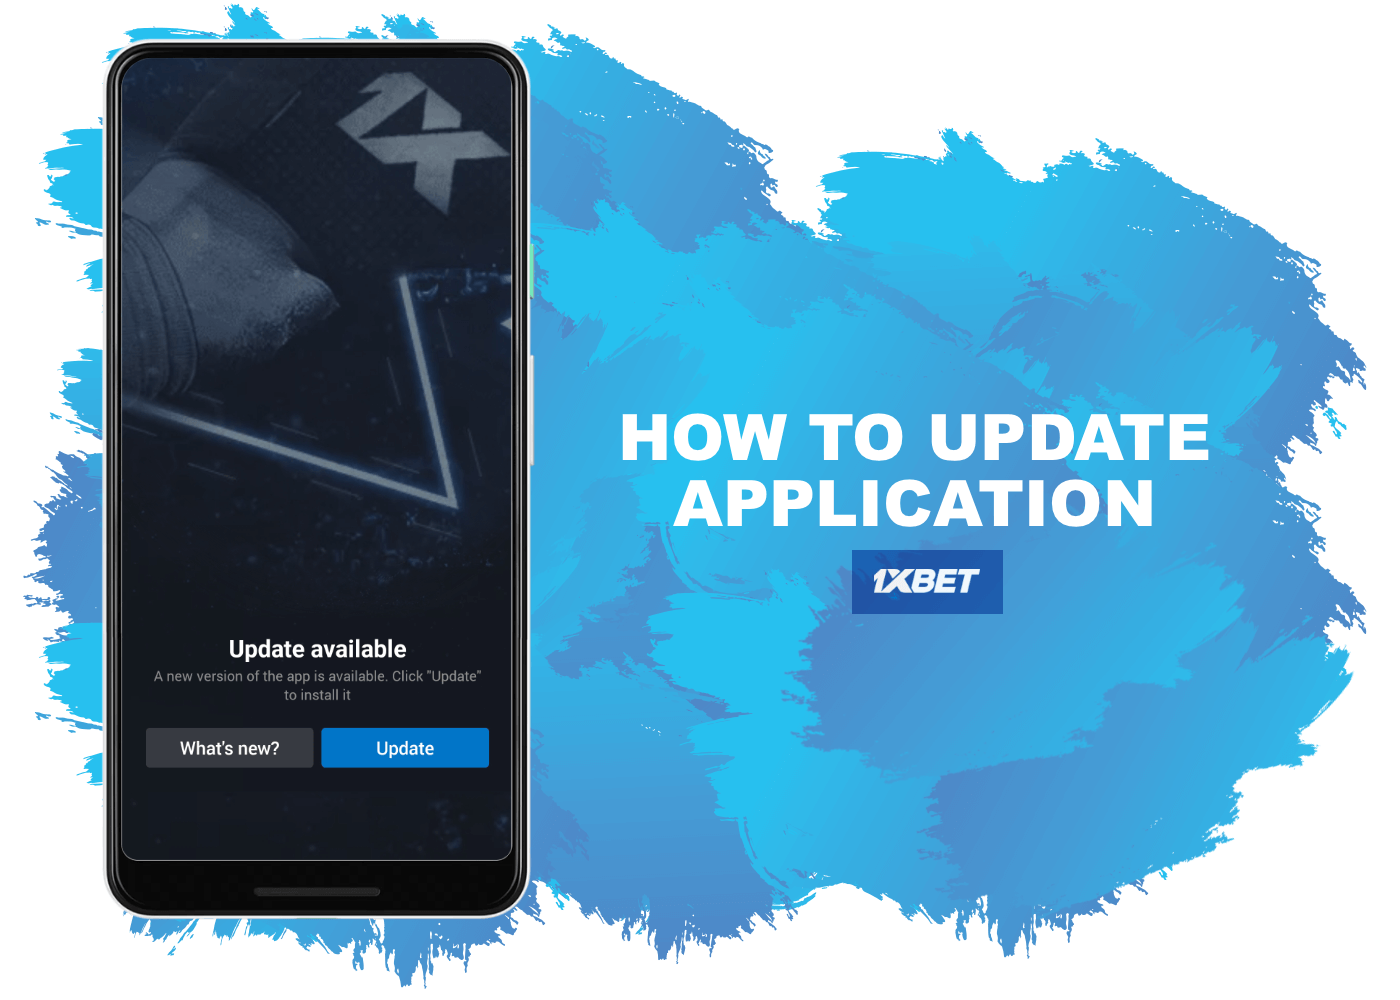 step-by-step guide how to update 1xbet mobile application